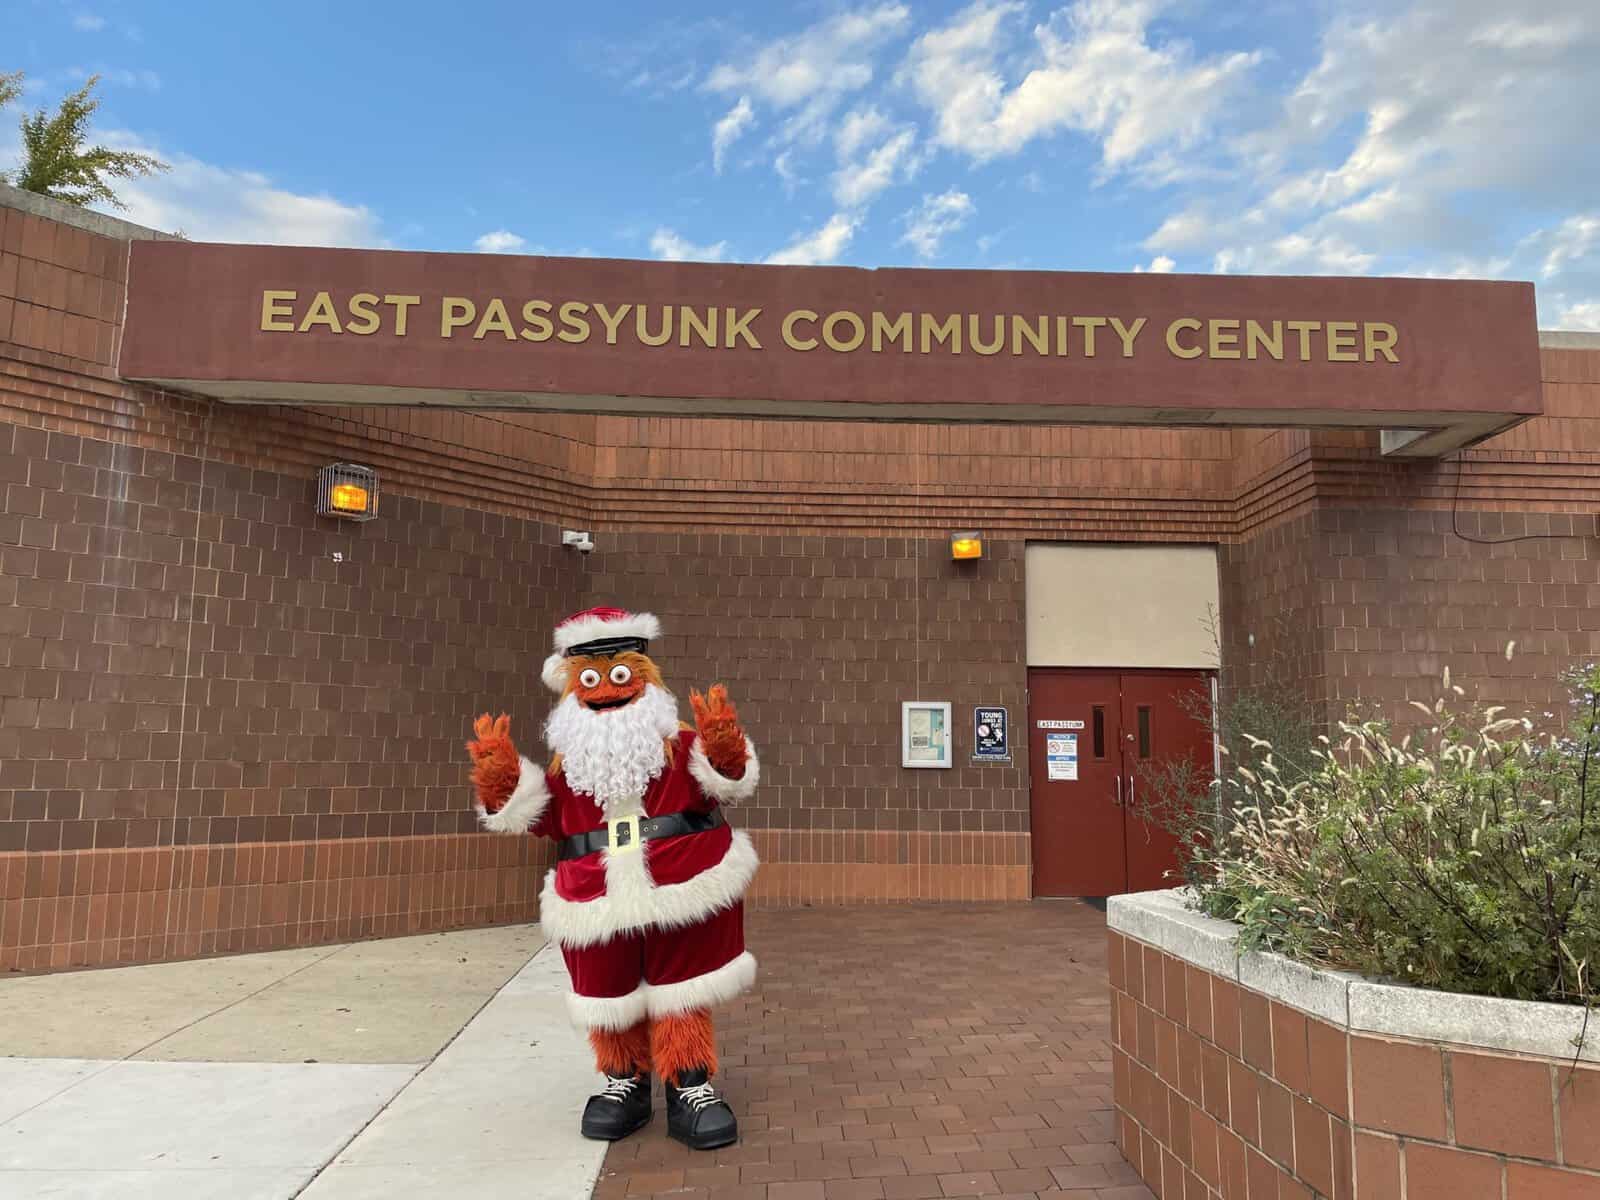 Gritty Claus helping spread Tinseltown cheer